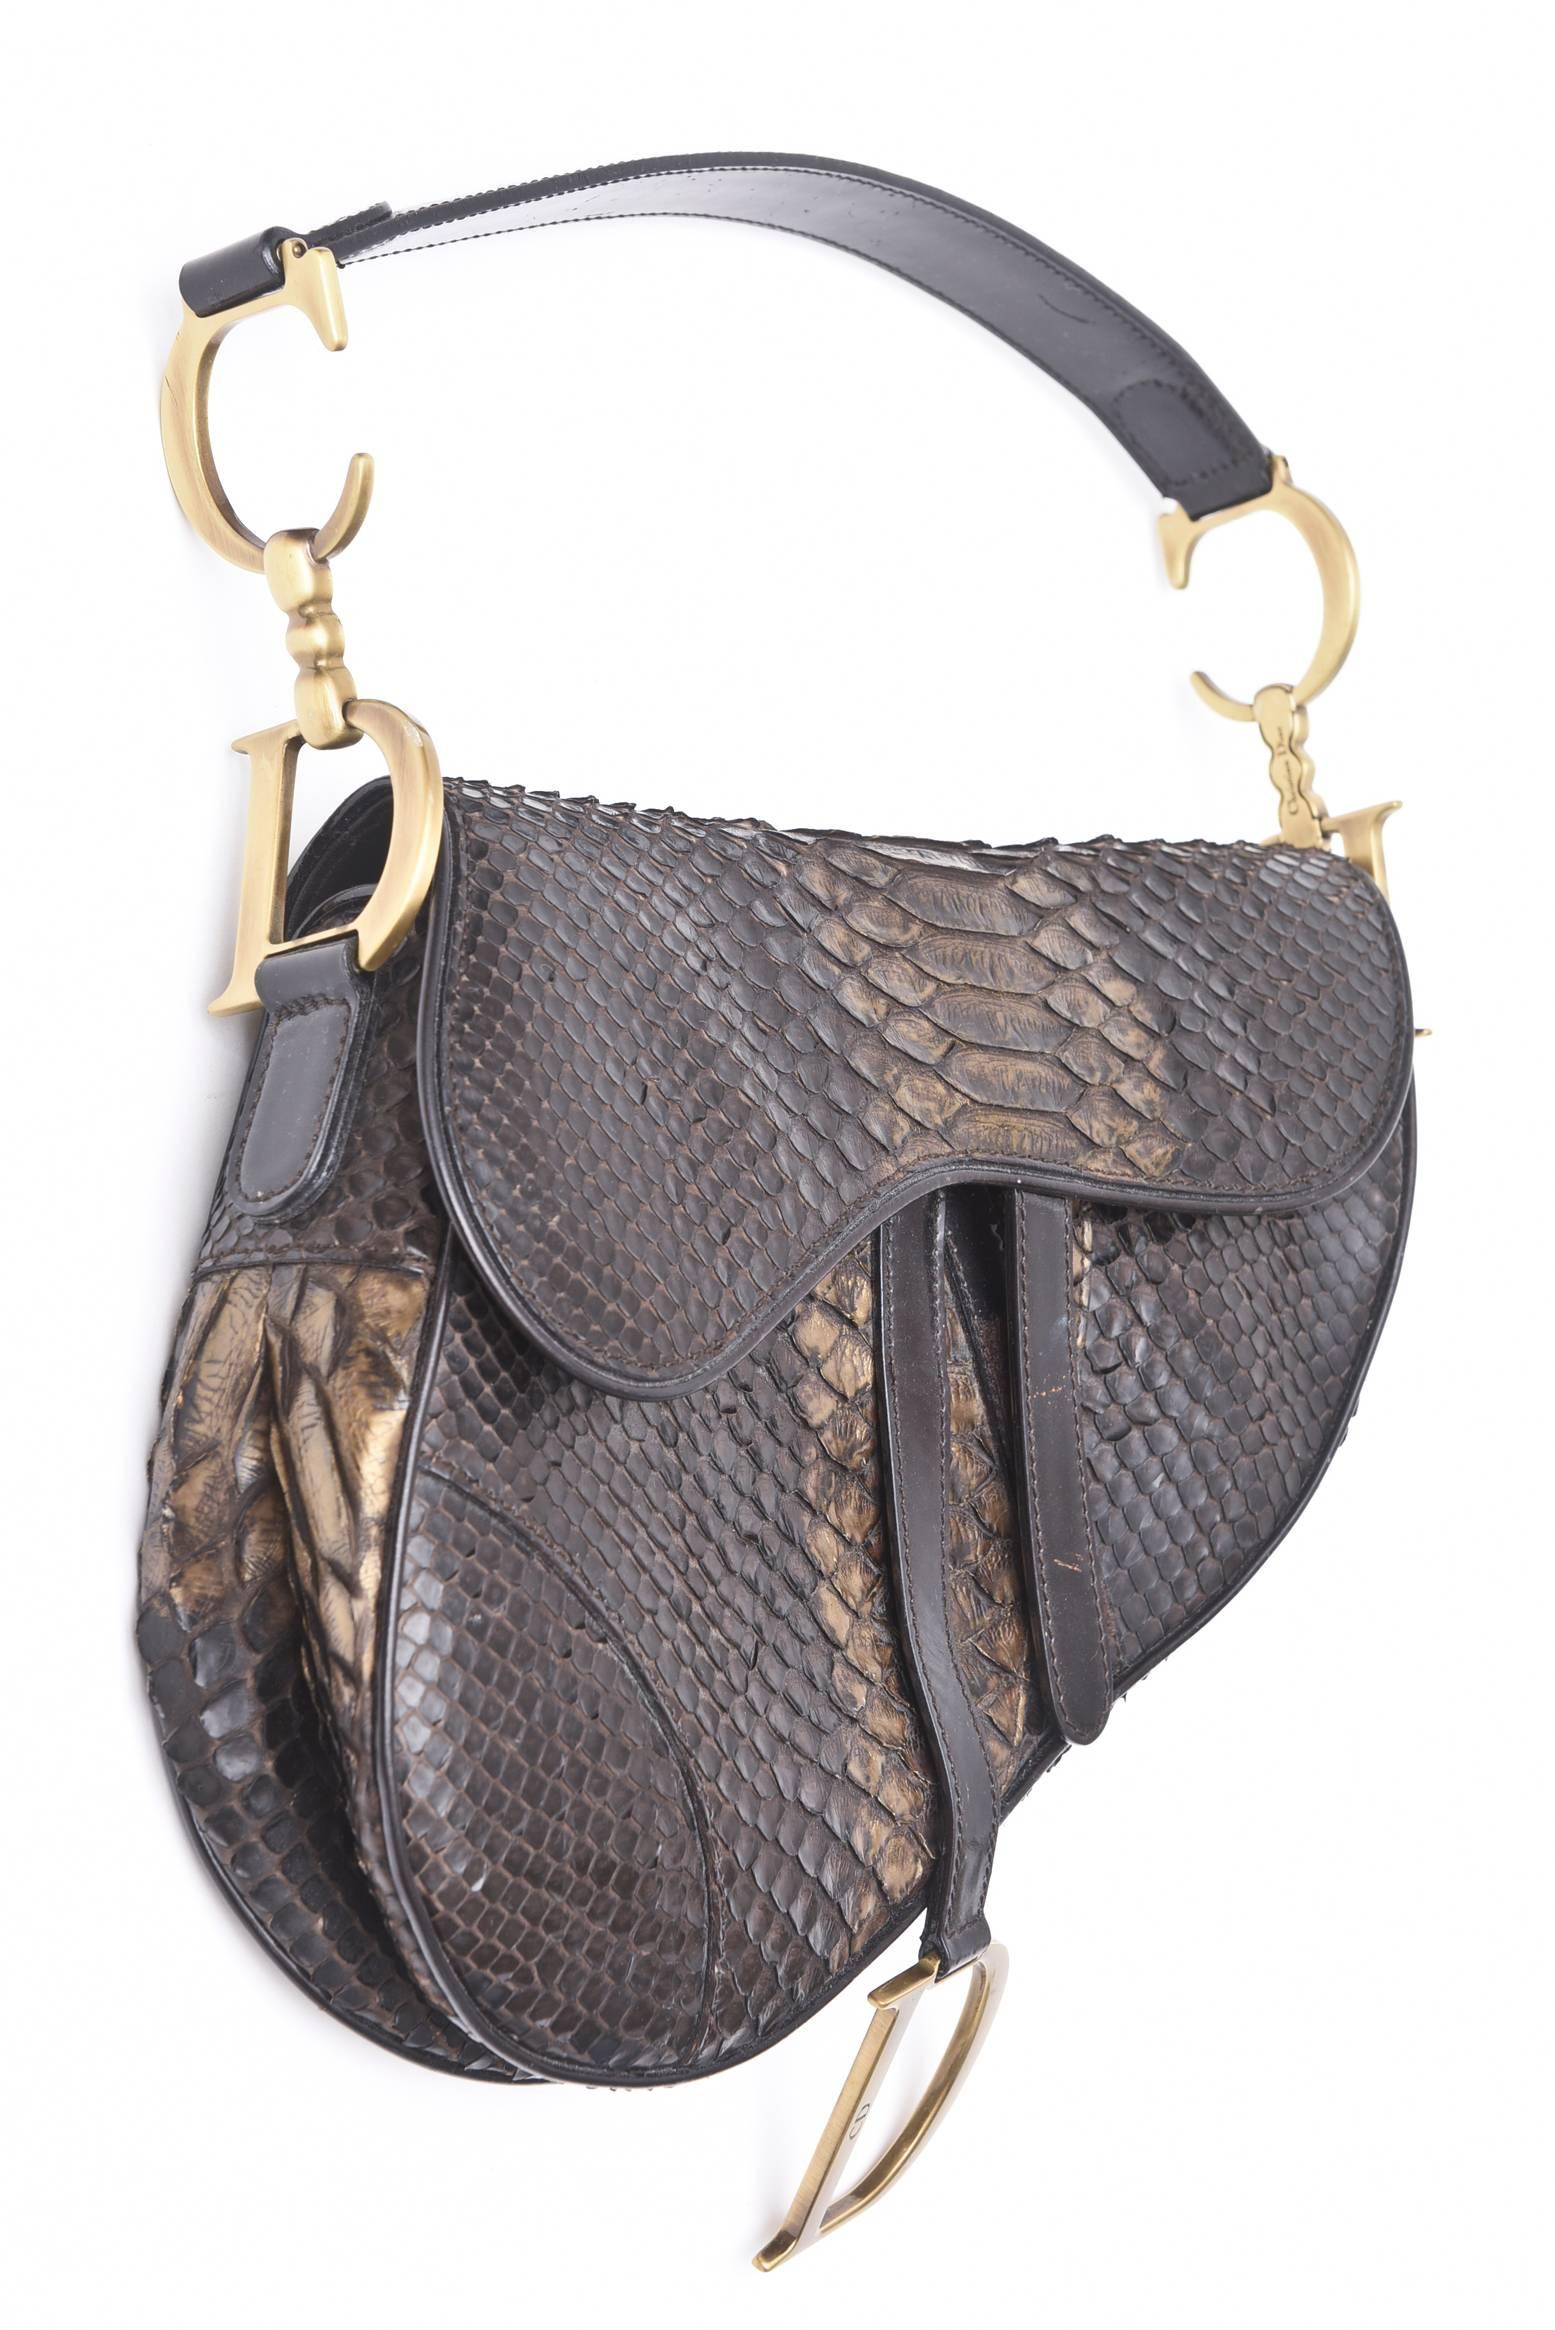 This stunning and luxe real python saddle bag/ handbag is a collectors piece. This was the first bag  designed by John Galliano for Christian Dior in the early 80's. To note... Christian Dior never does chocolate brown... It is a limited edition